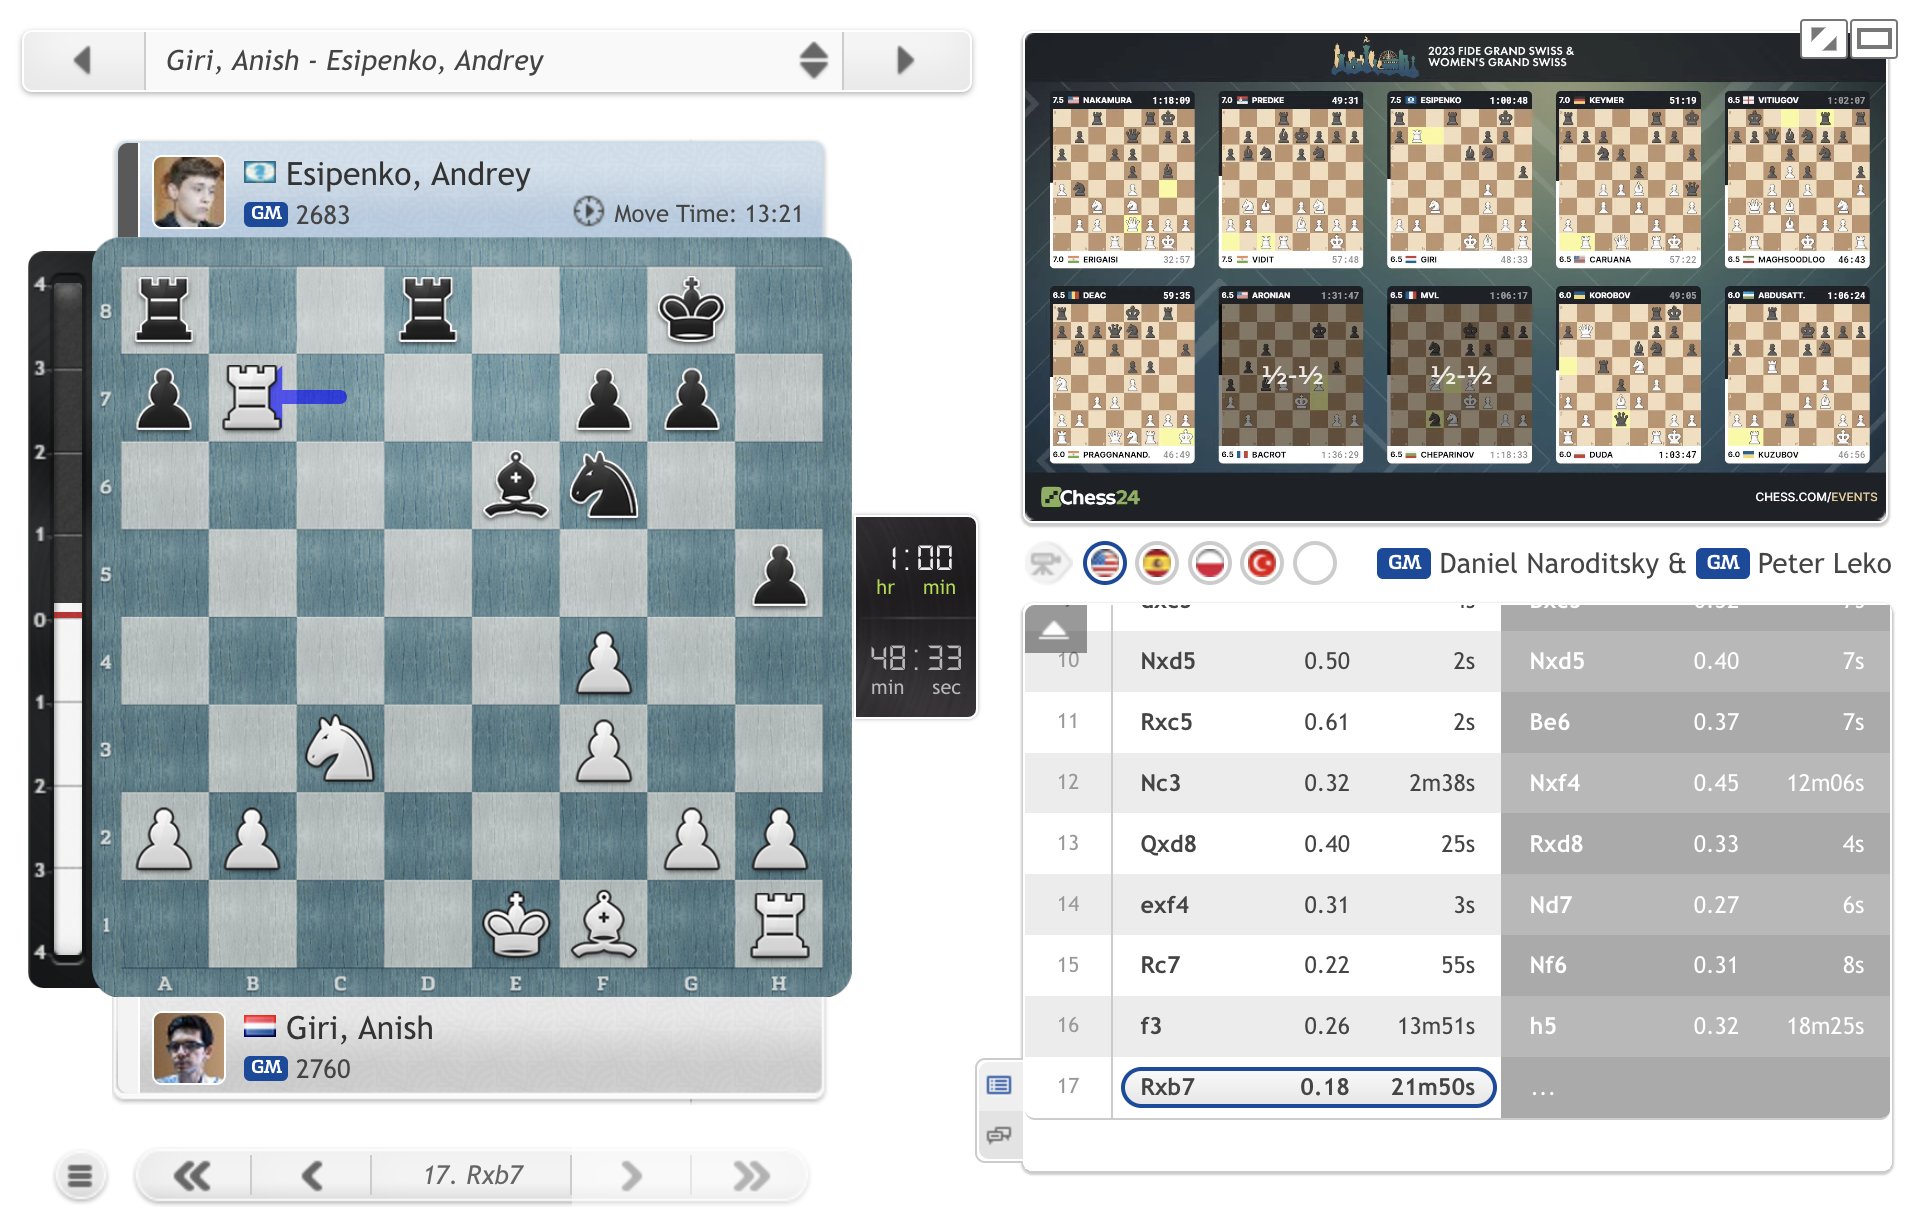 chess24.com on X: Giri has snacked on a pawn against Esipenko — a lot of  other players at the top will be keeping a close eye on this game!  #FIDEGrandSwiss  /